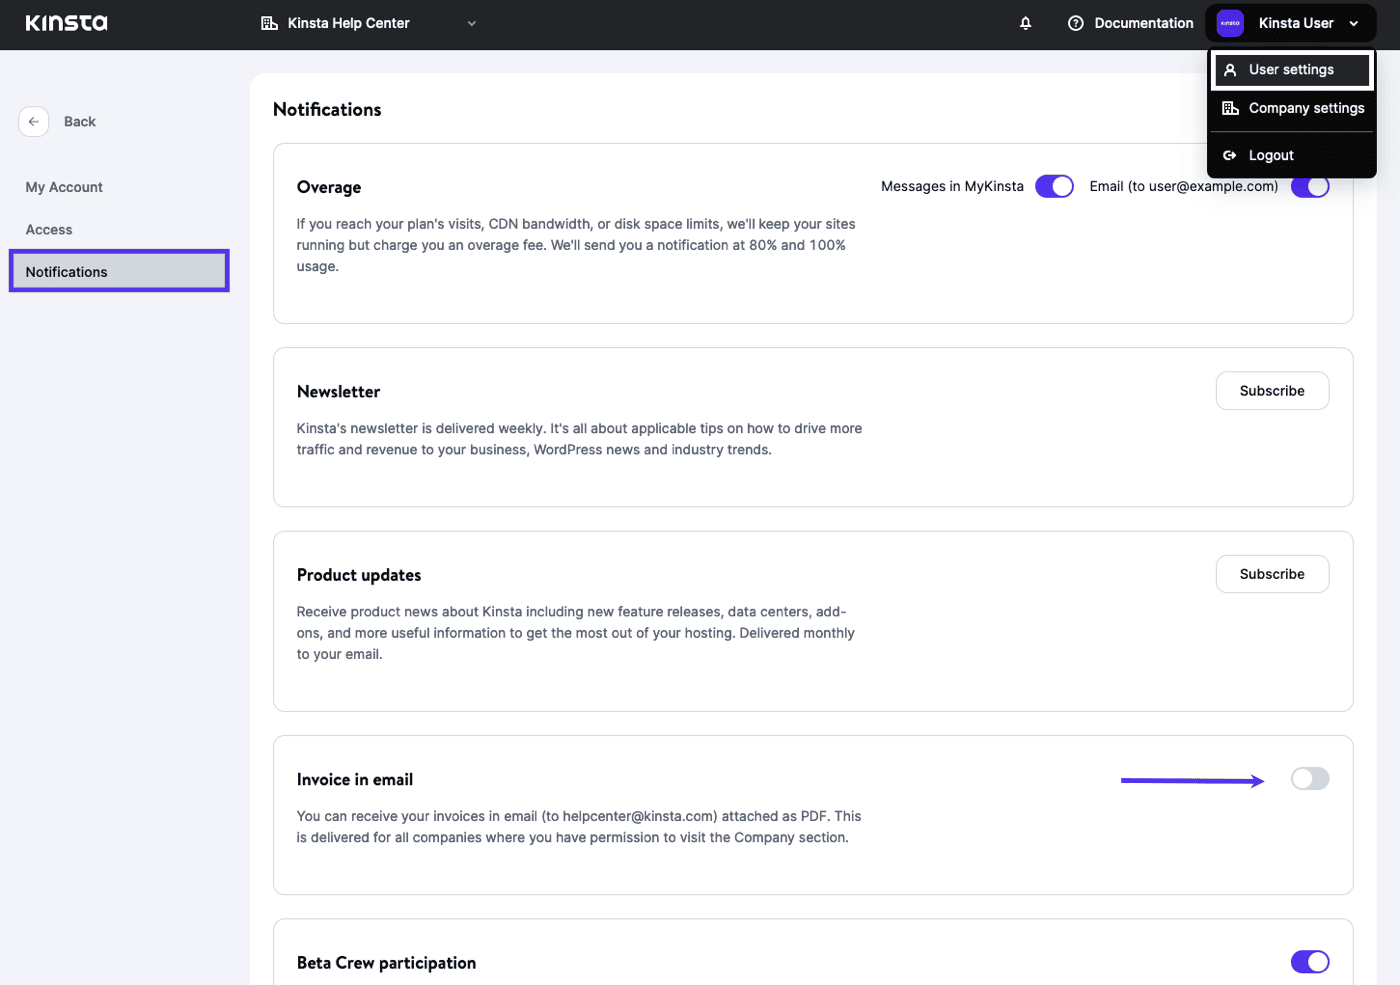 Enabling automatic invoice emails in MyKinsta.